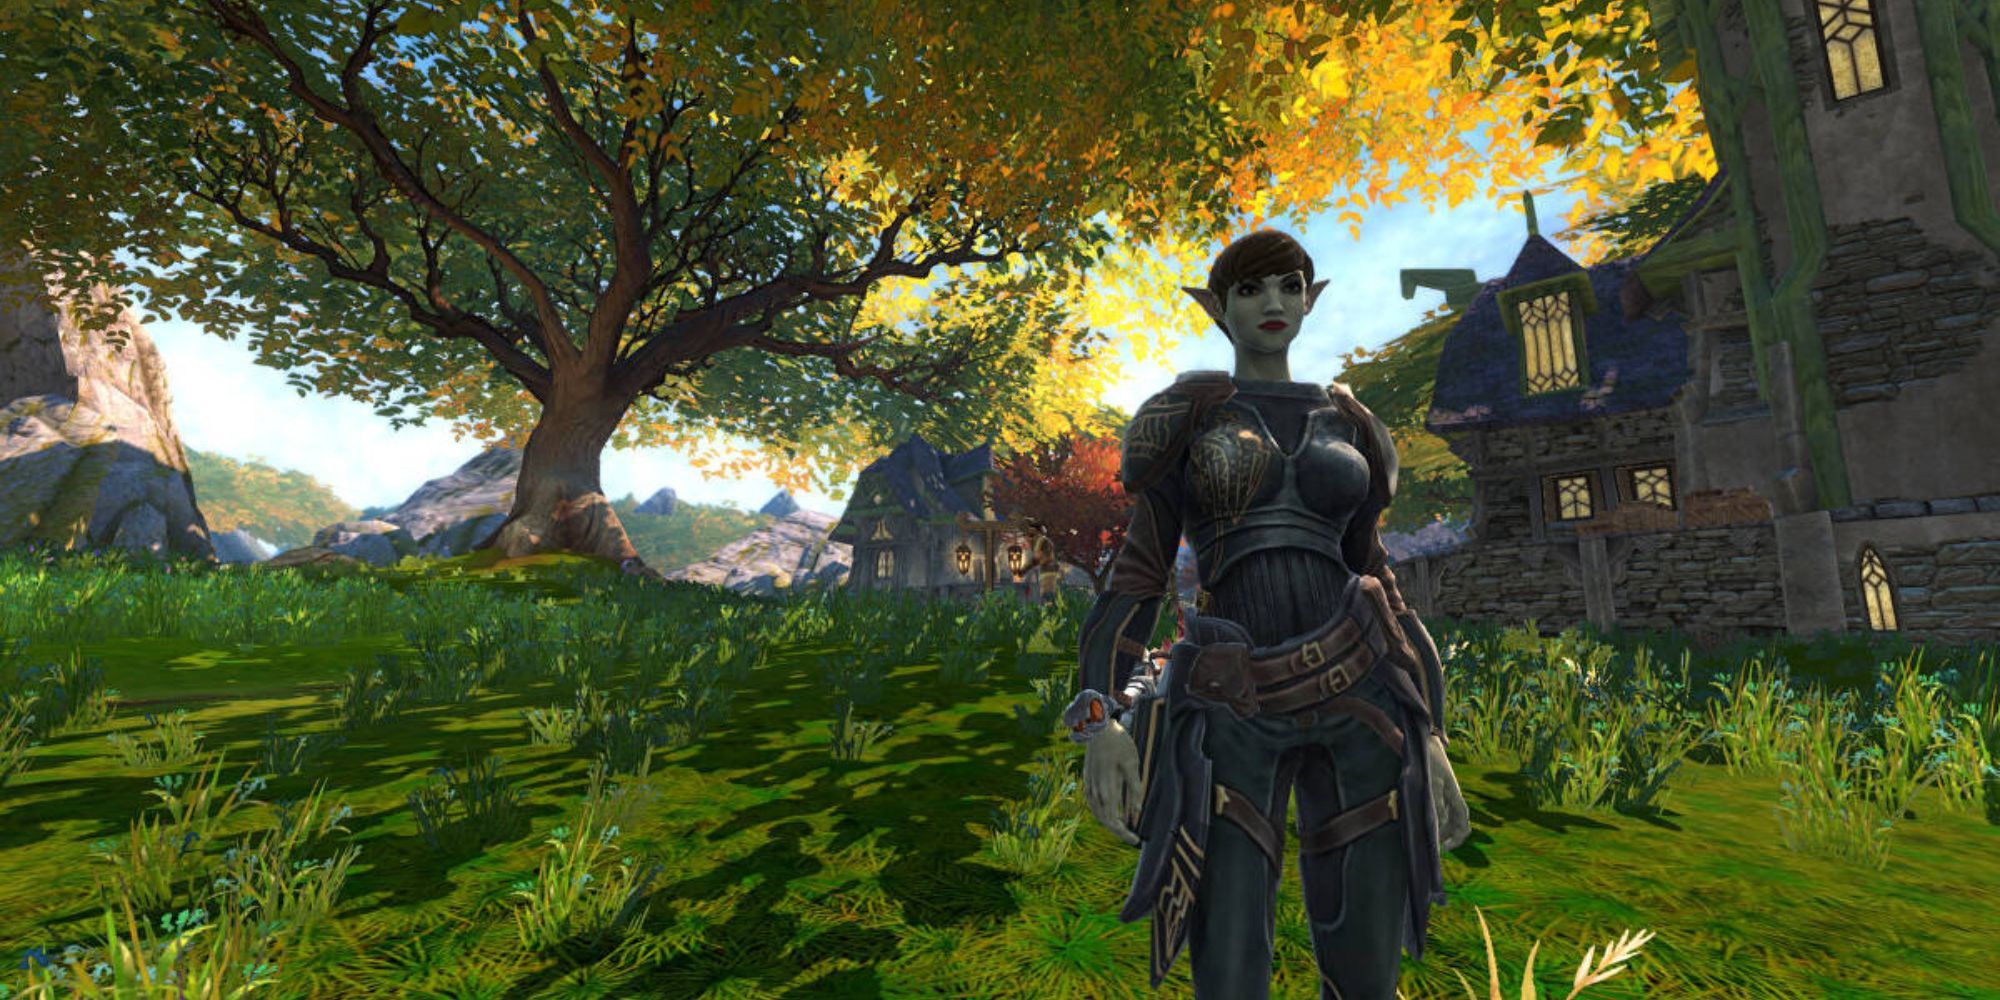 An elven looking character standing in front of a tree in Kingdoms of Amalur: Reckoning